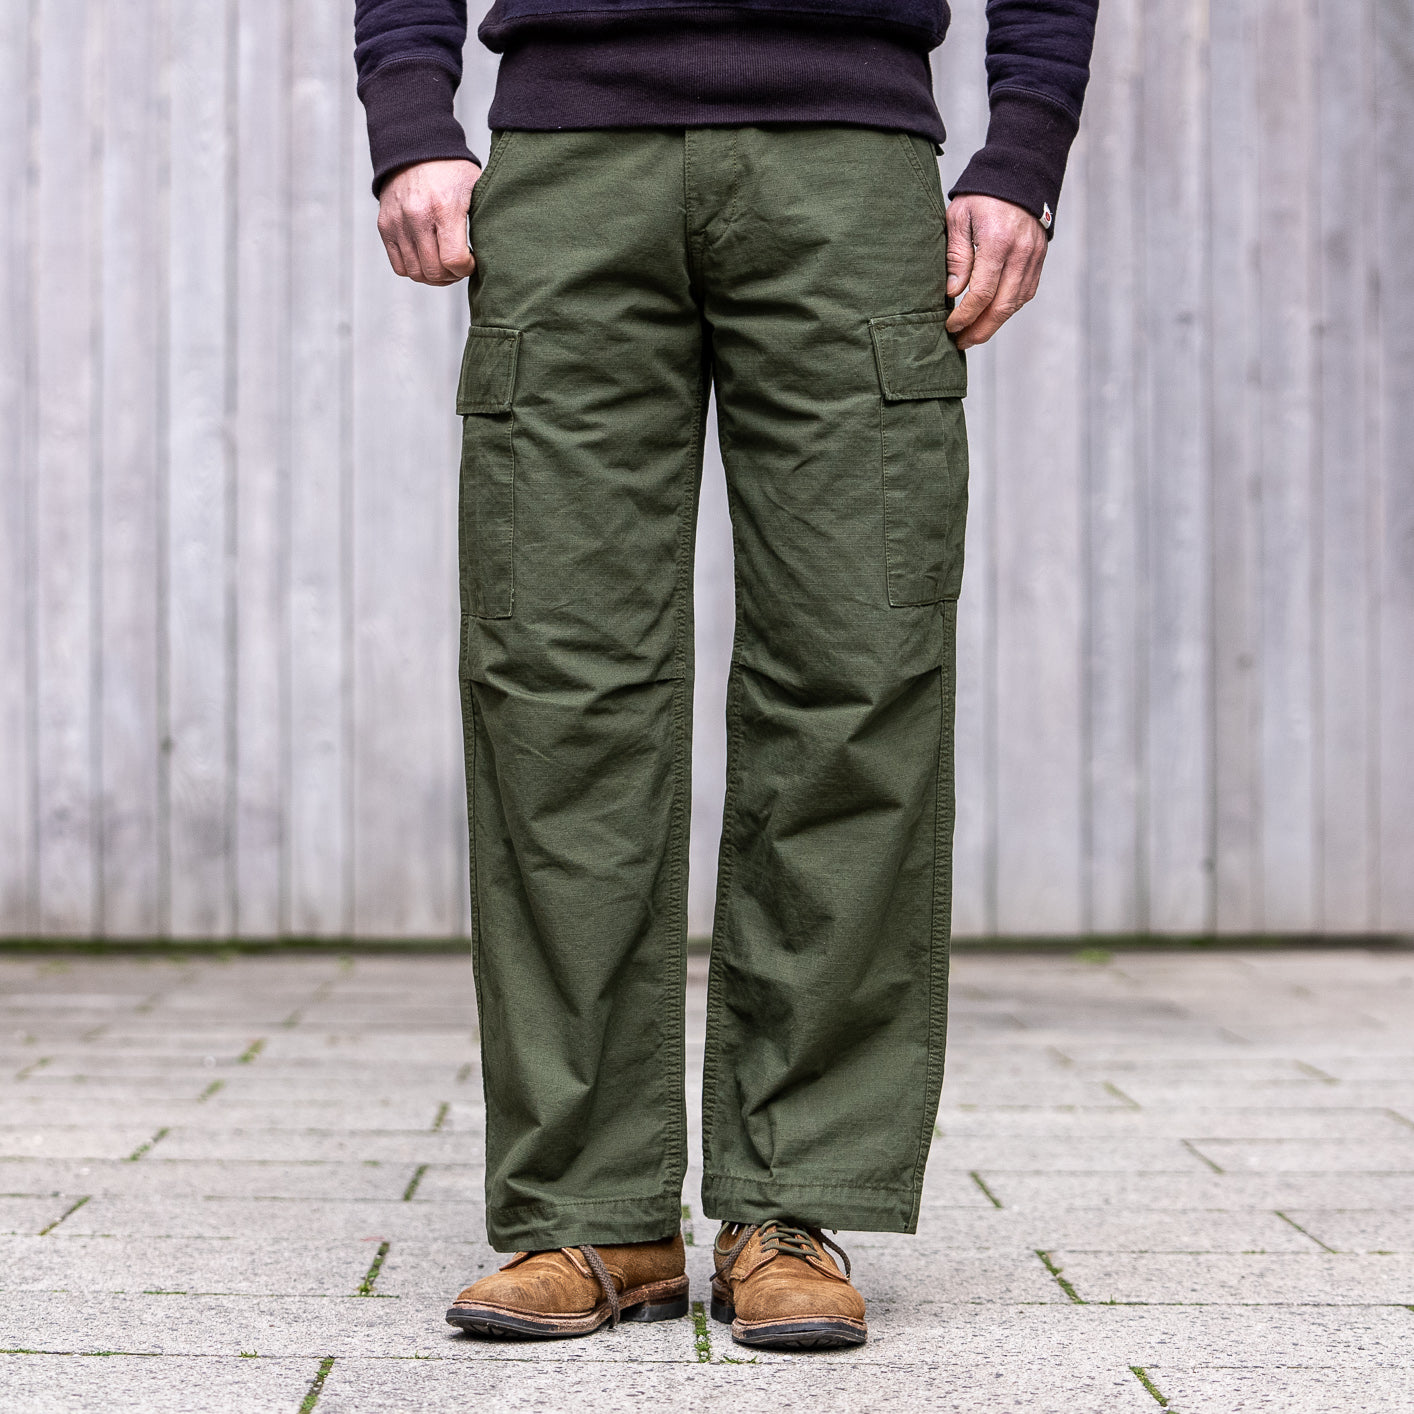 Orslow 6 Pocket Cargo Fatigue Pants Olive Ripstop - Made in Japan